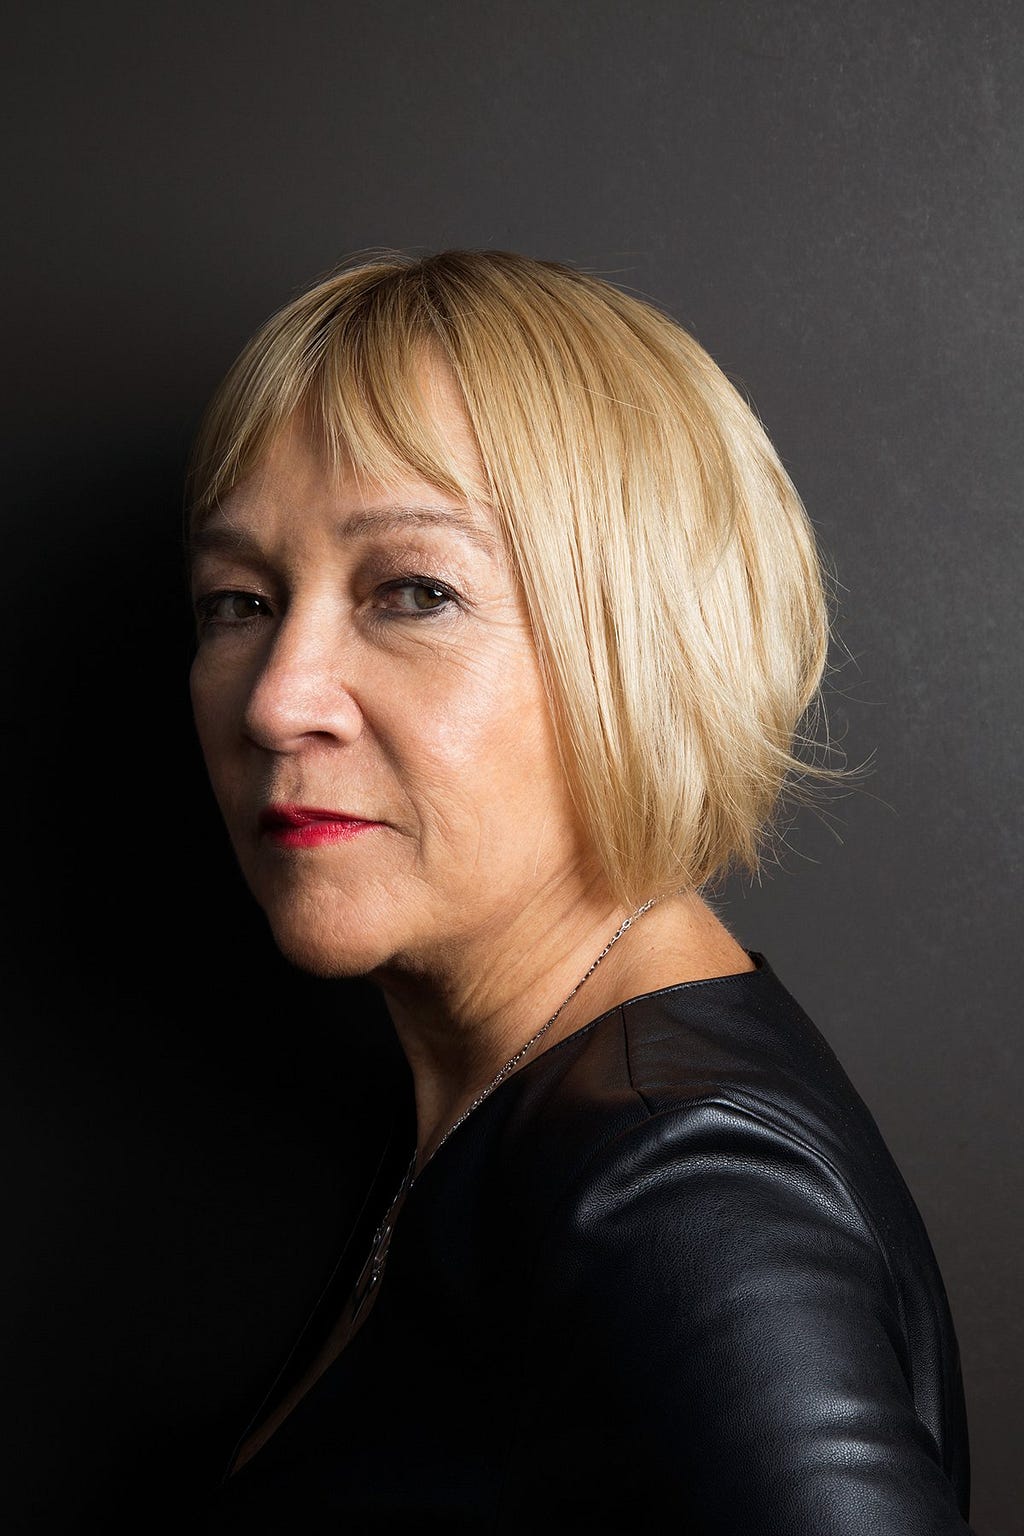 Photograph of Cindy Gallop looking at the viewer.